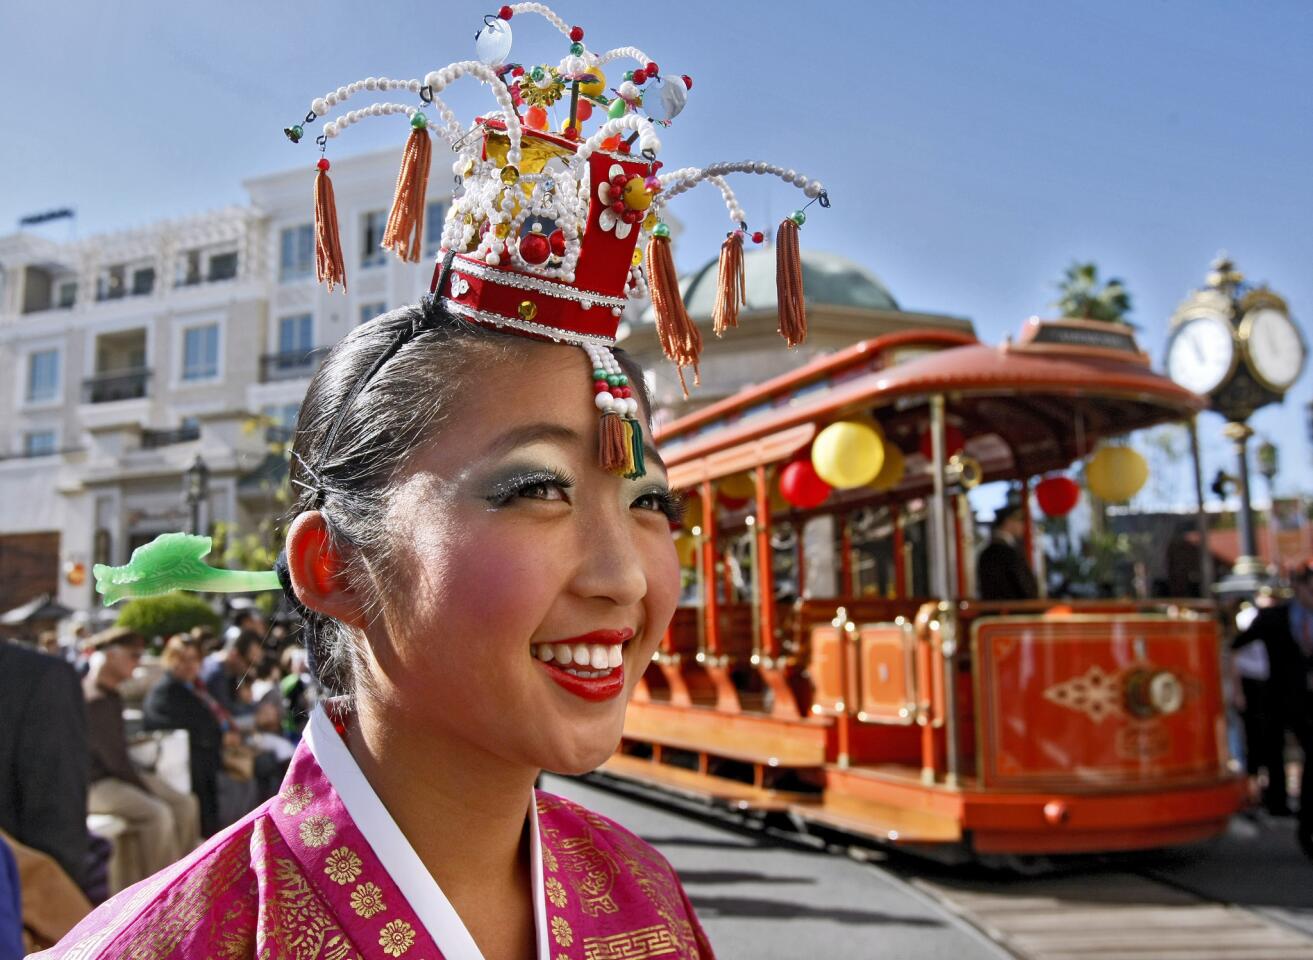 Isabella Kim, 13 of L.A. and from the Jung Im Lee Korean Dance Academy, smiles as the celebrations kicks off during the Americana at Brand's Lunar New Year event in Glendale on Saturday, Feb. 1, 2014. The Americana at Brand kicked off the Year of the Horse with a festival of cultural heritage for the entire family.